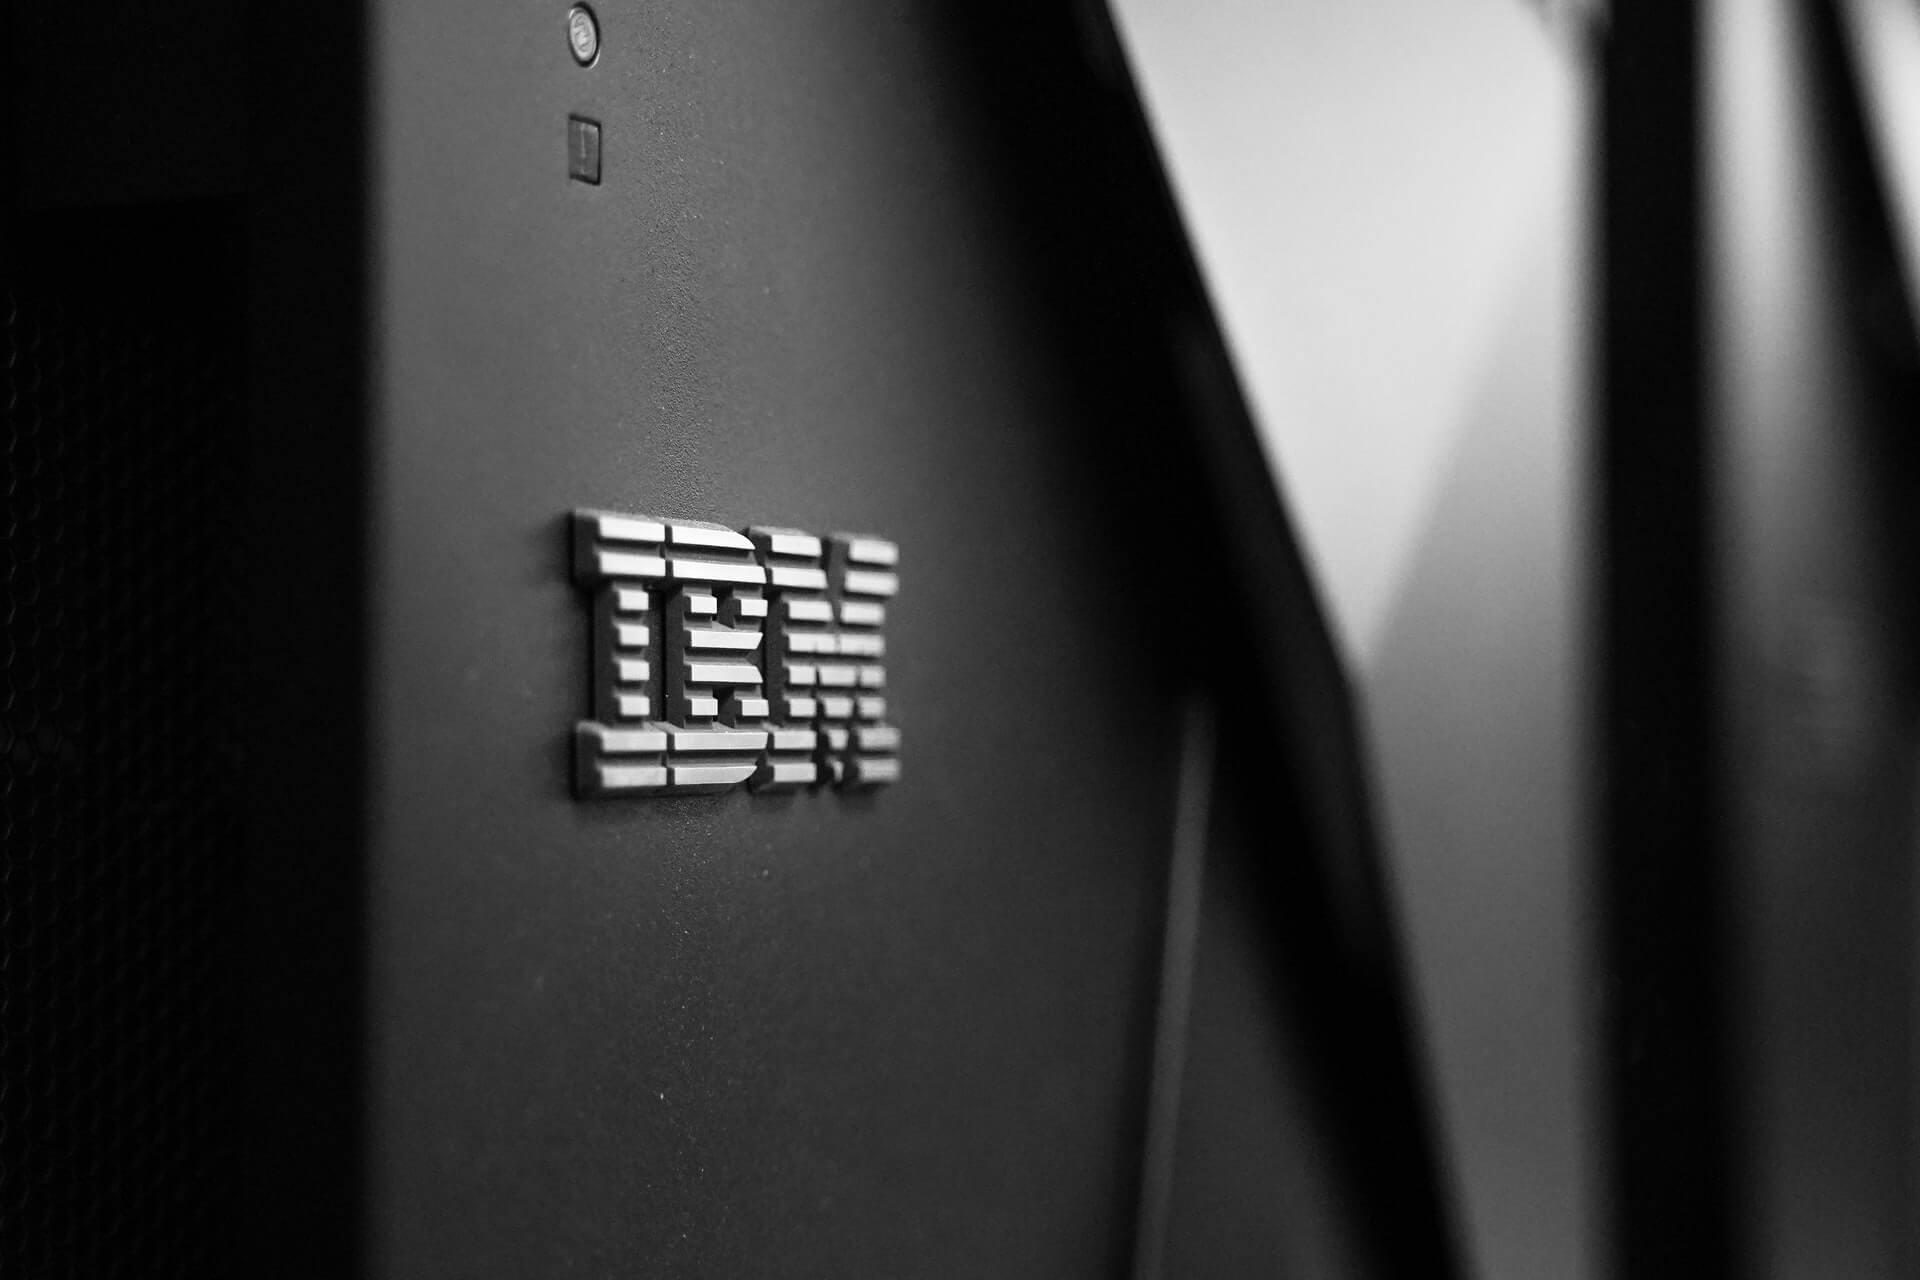 IBM will collaborate with Japan to make the most advanced chips in the world